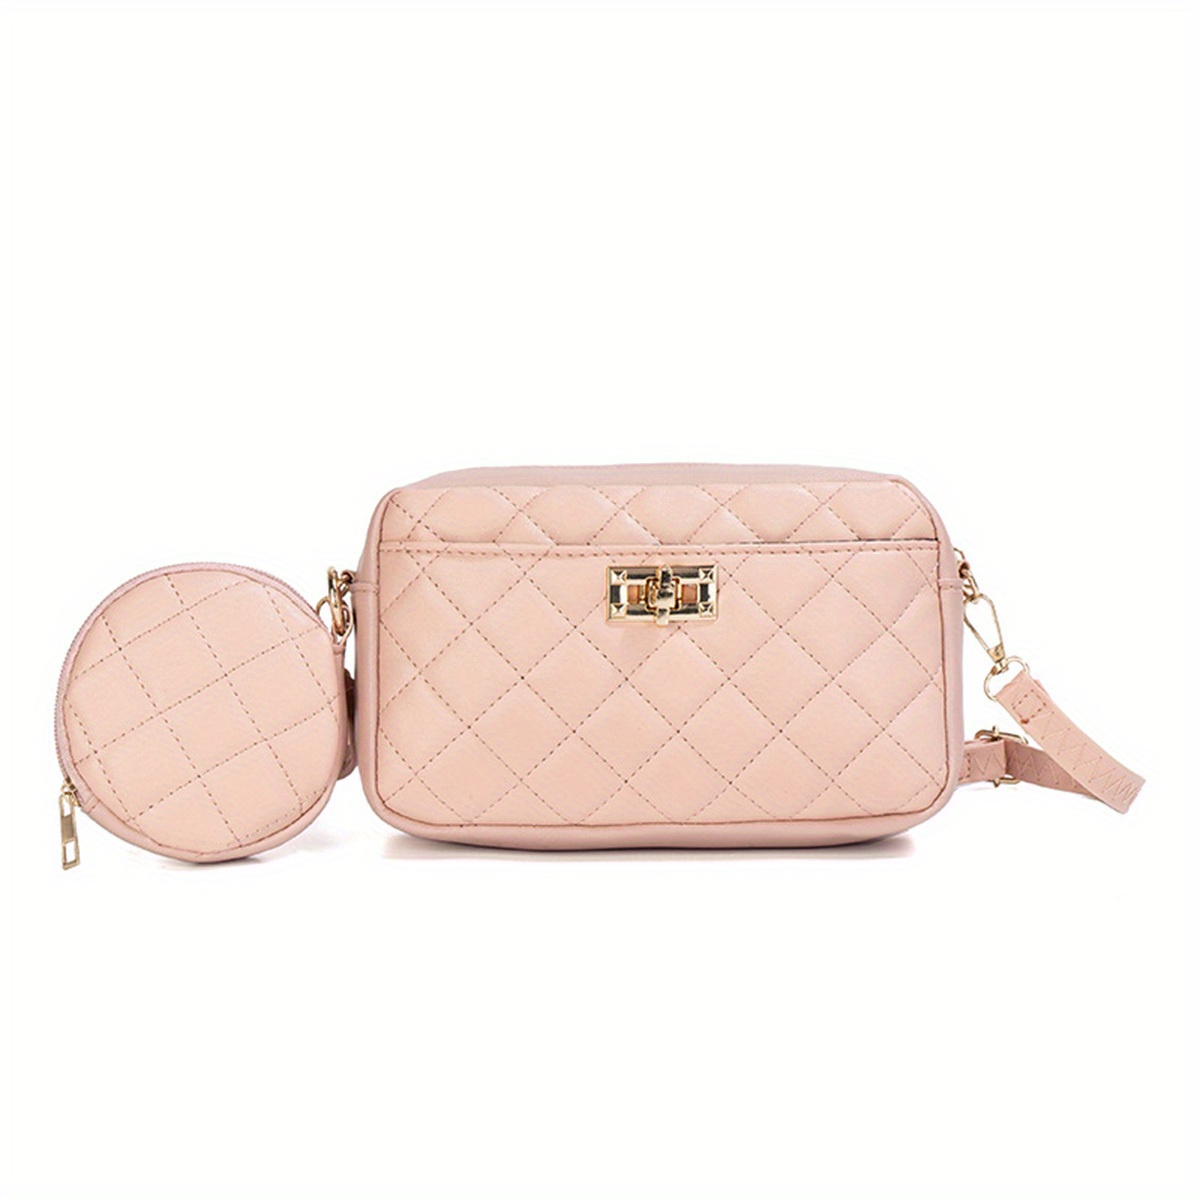 GUESS Pink Solid Sling Bag